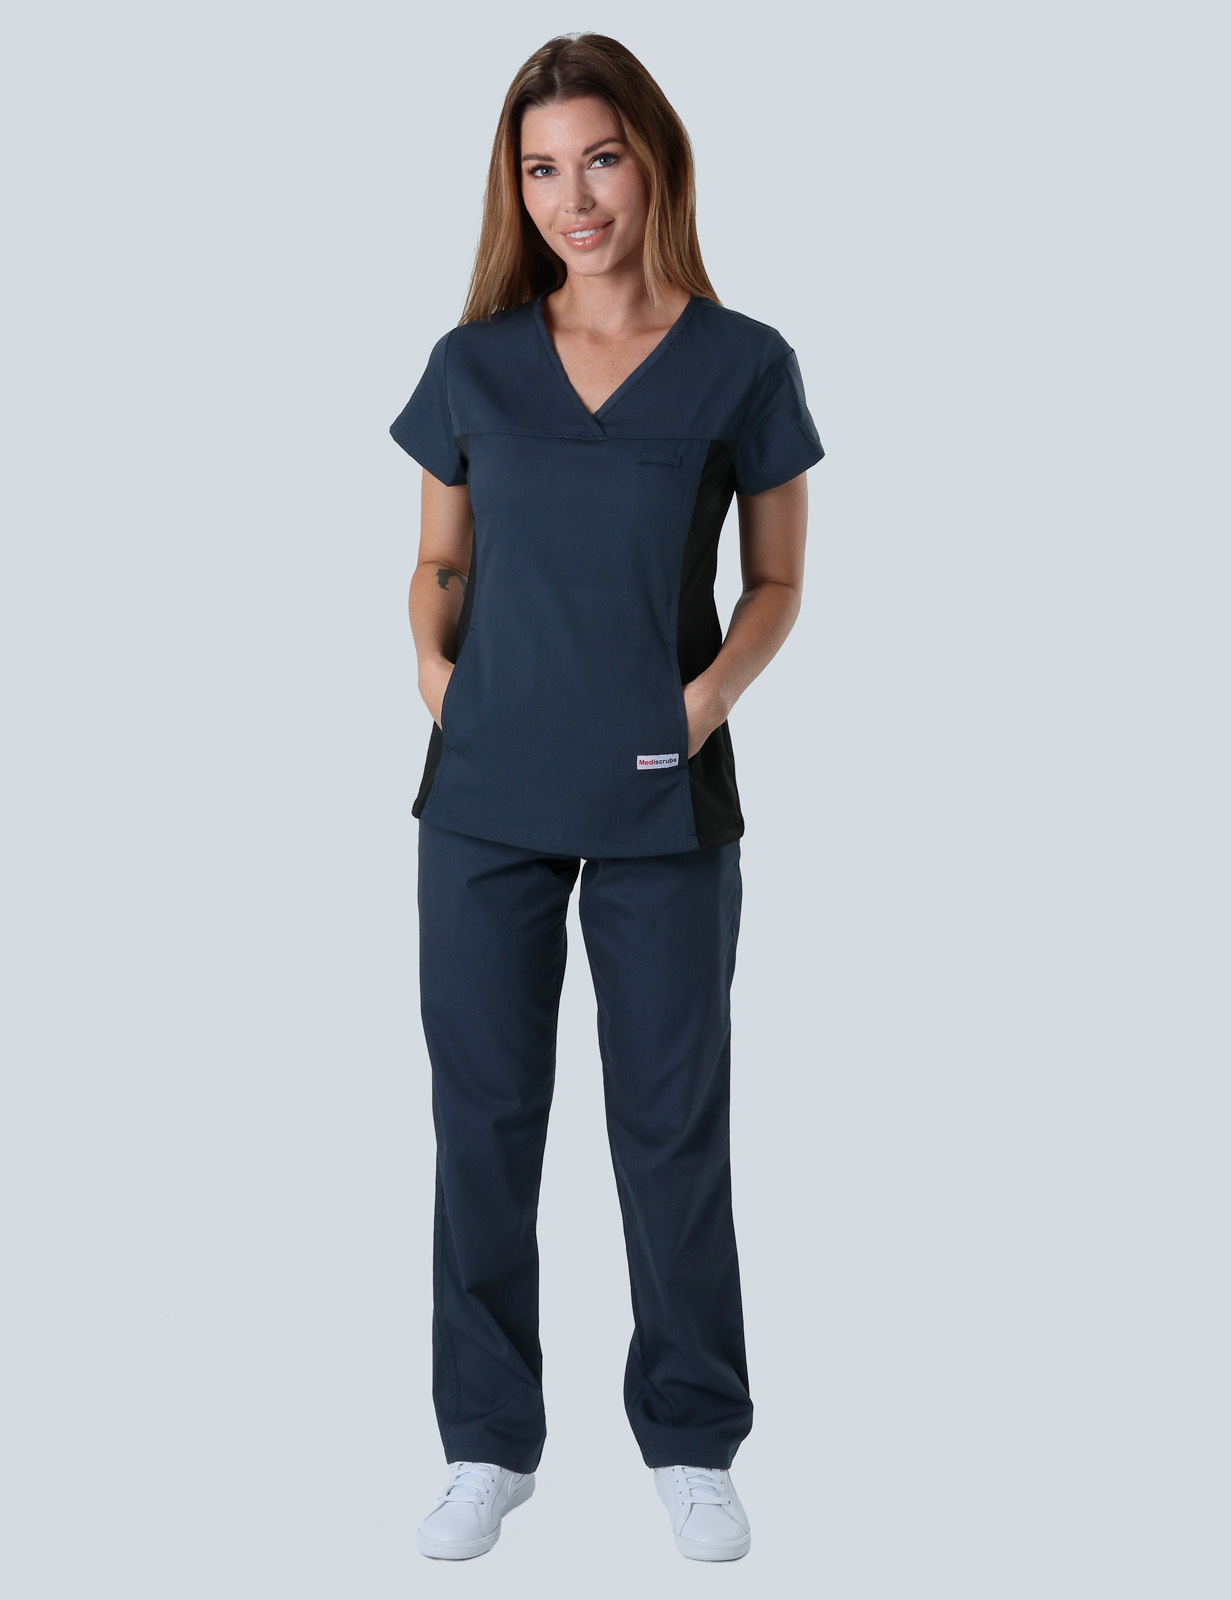 Women's Fit Solid Scrub Top With Spandex Panel - Navy - XX Small